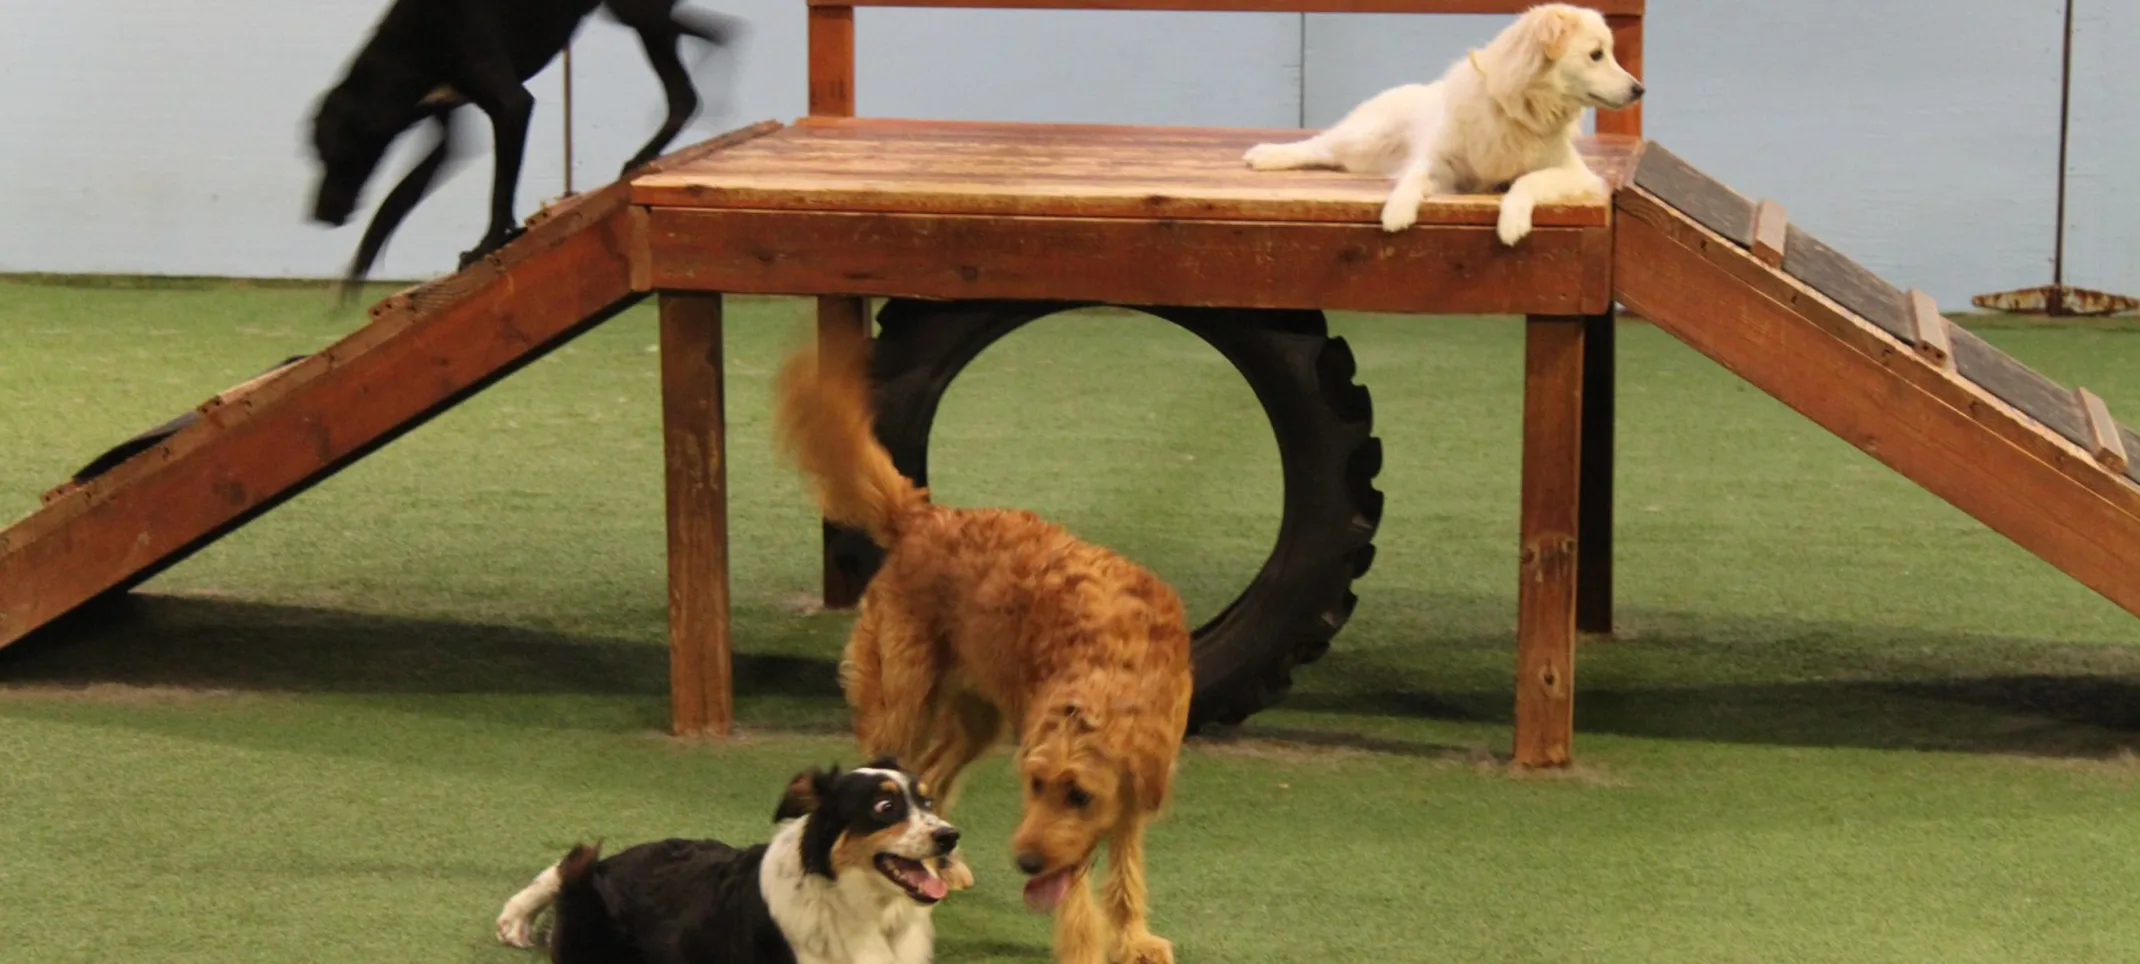 Dogs on Wooden Play Area at The Pet Ranch